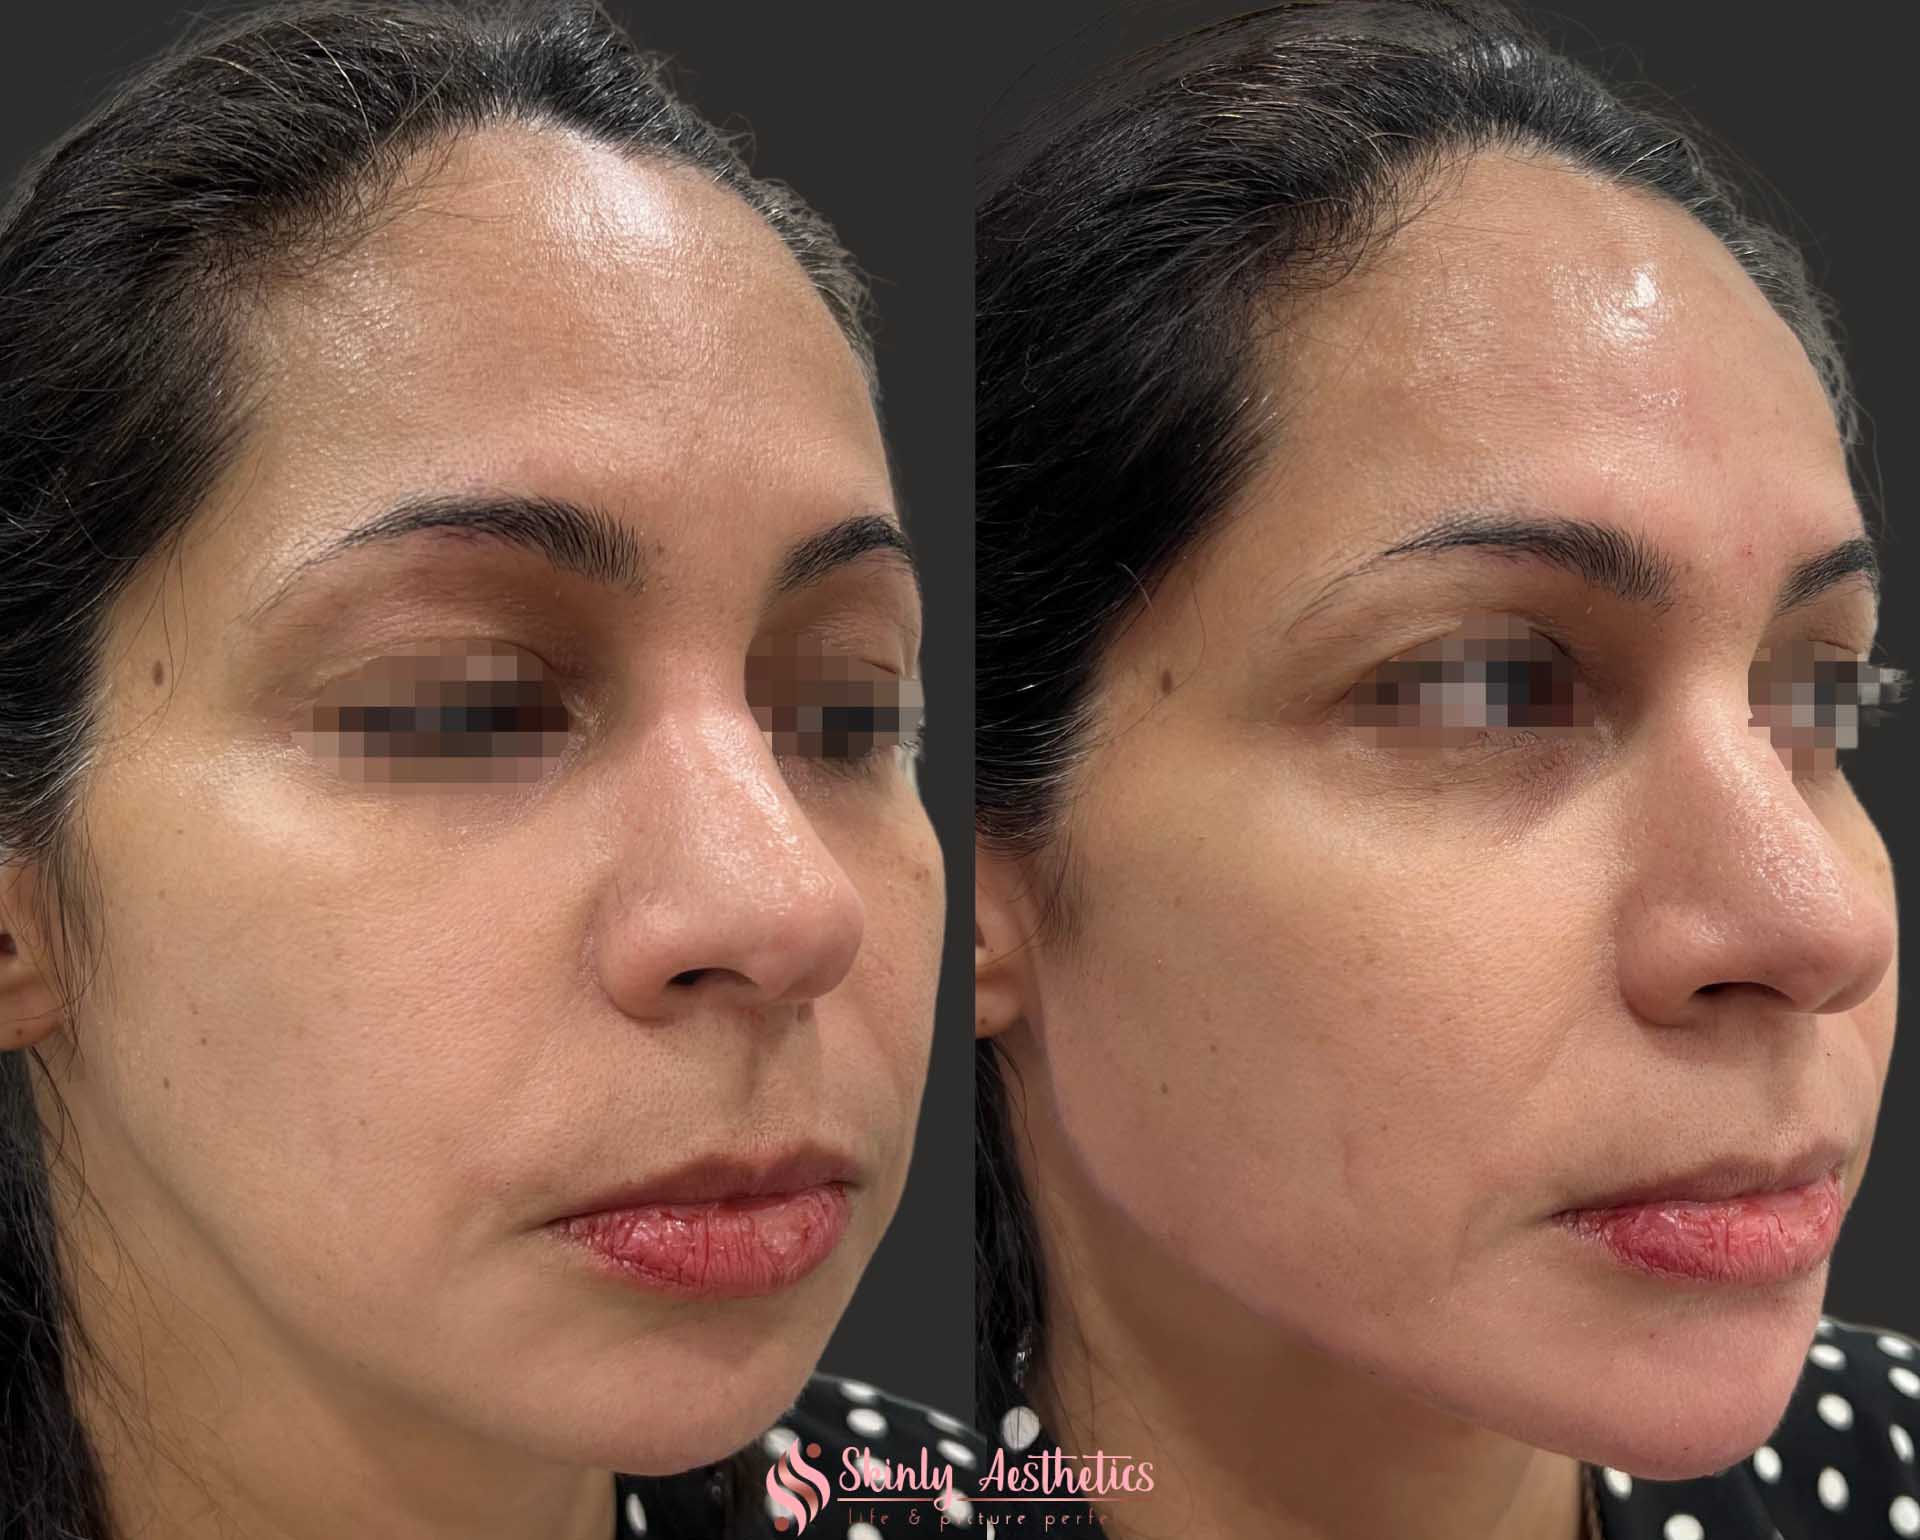 before and after results of jawline and chin reshaping with Radiesse and Juvederm fillers